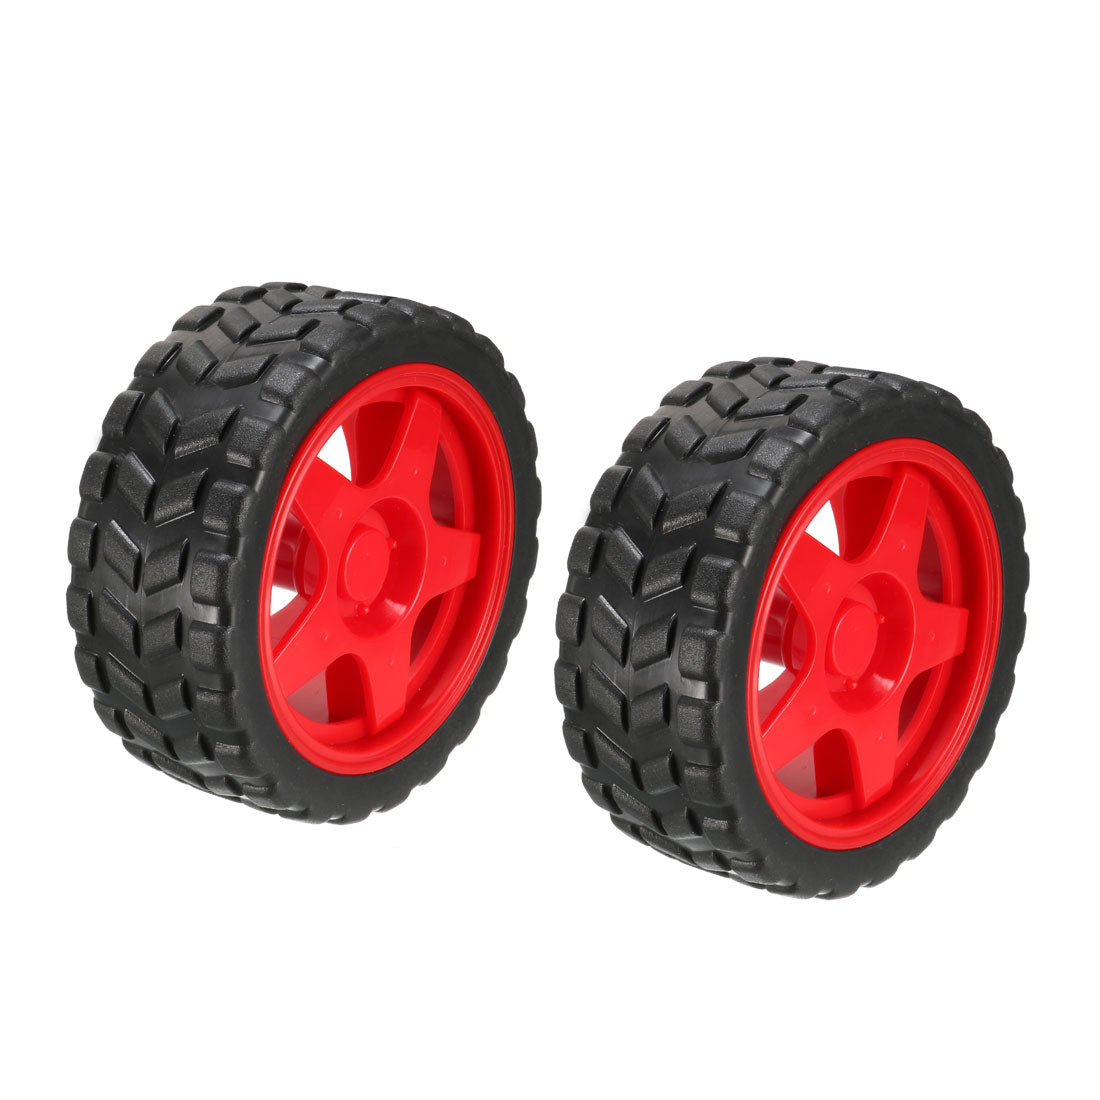 uxcell Uxcell 2pcs 65mm Diameter 27mm Thickness Rubber RC Wheel Red Black